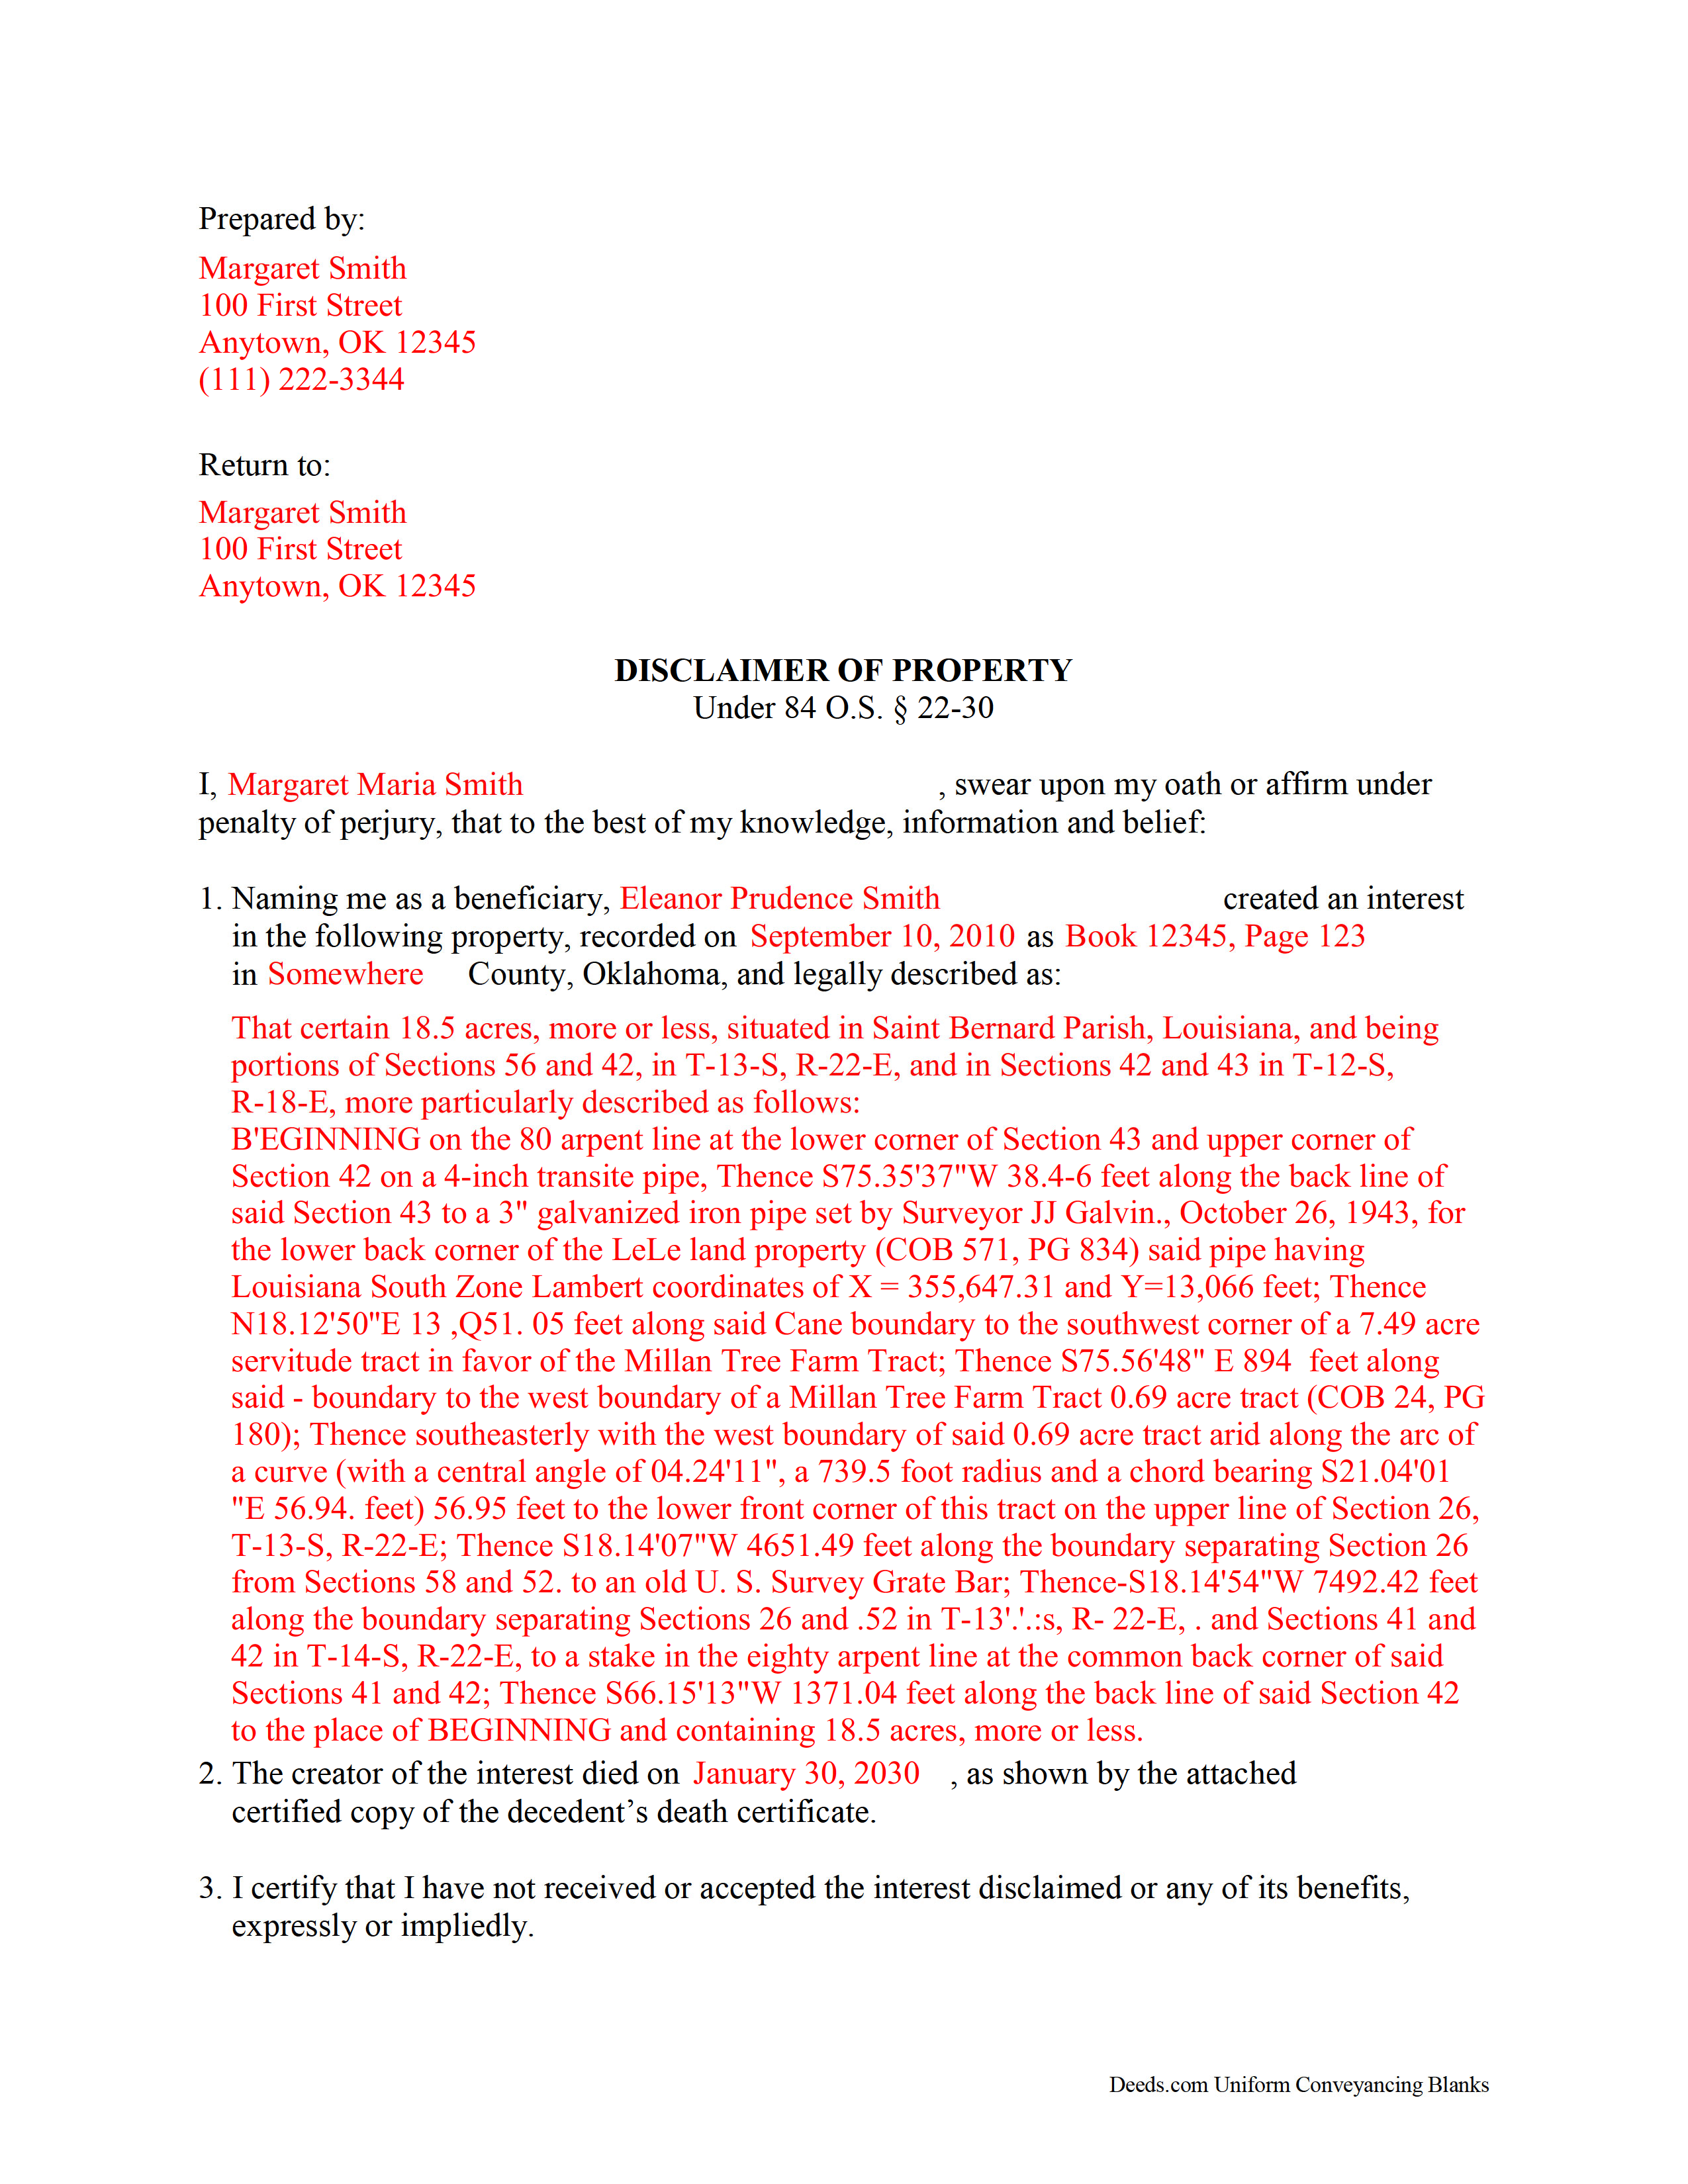 Completed Example of the Disclaimer of Interest Document